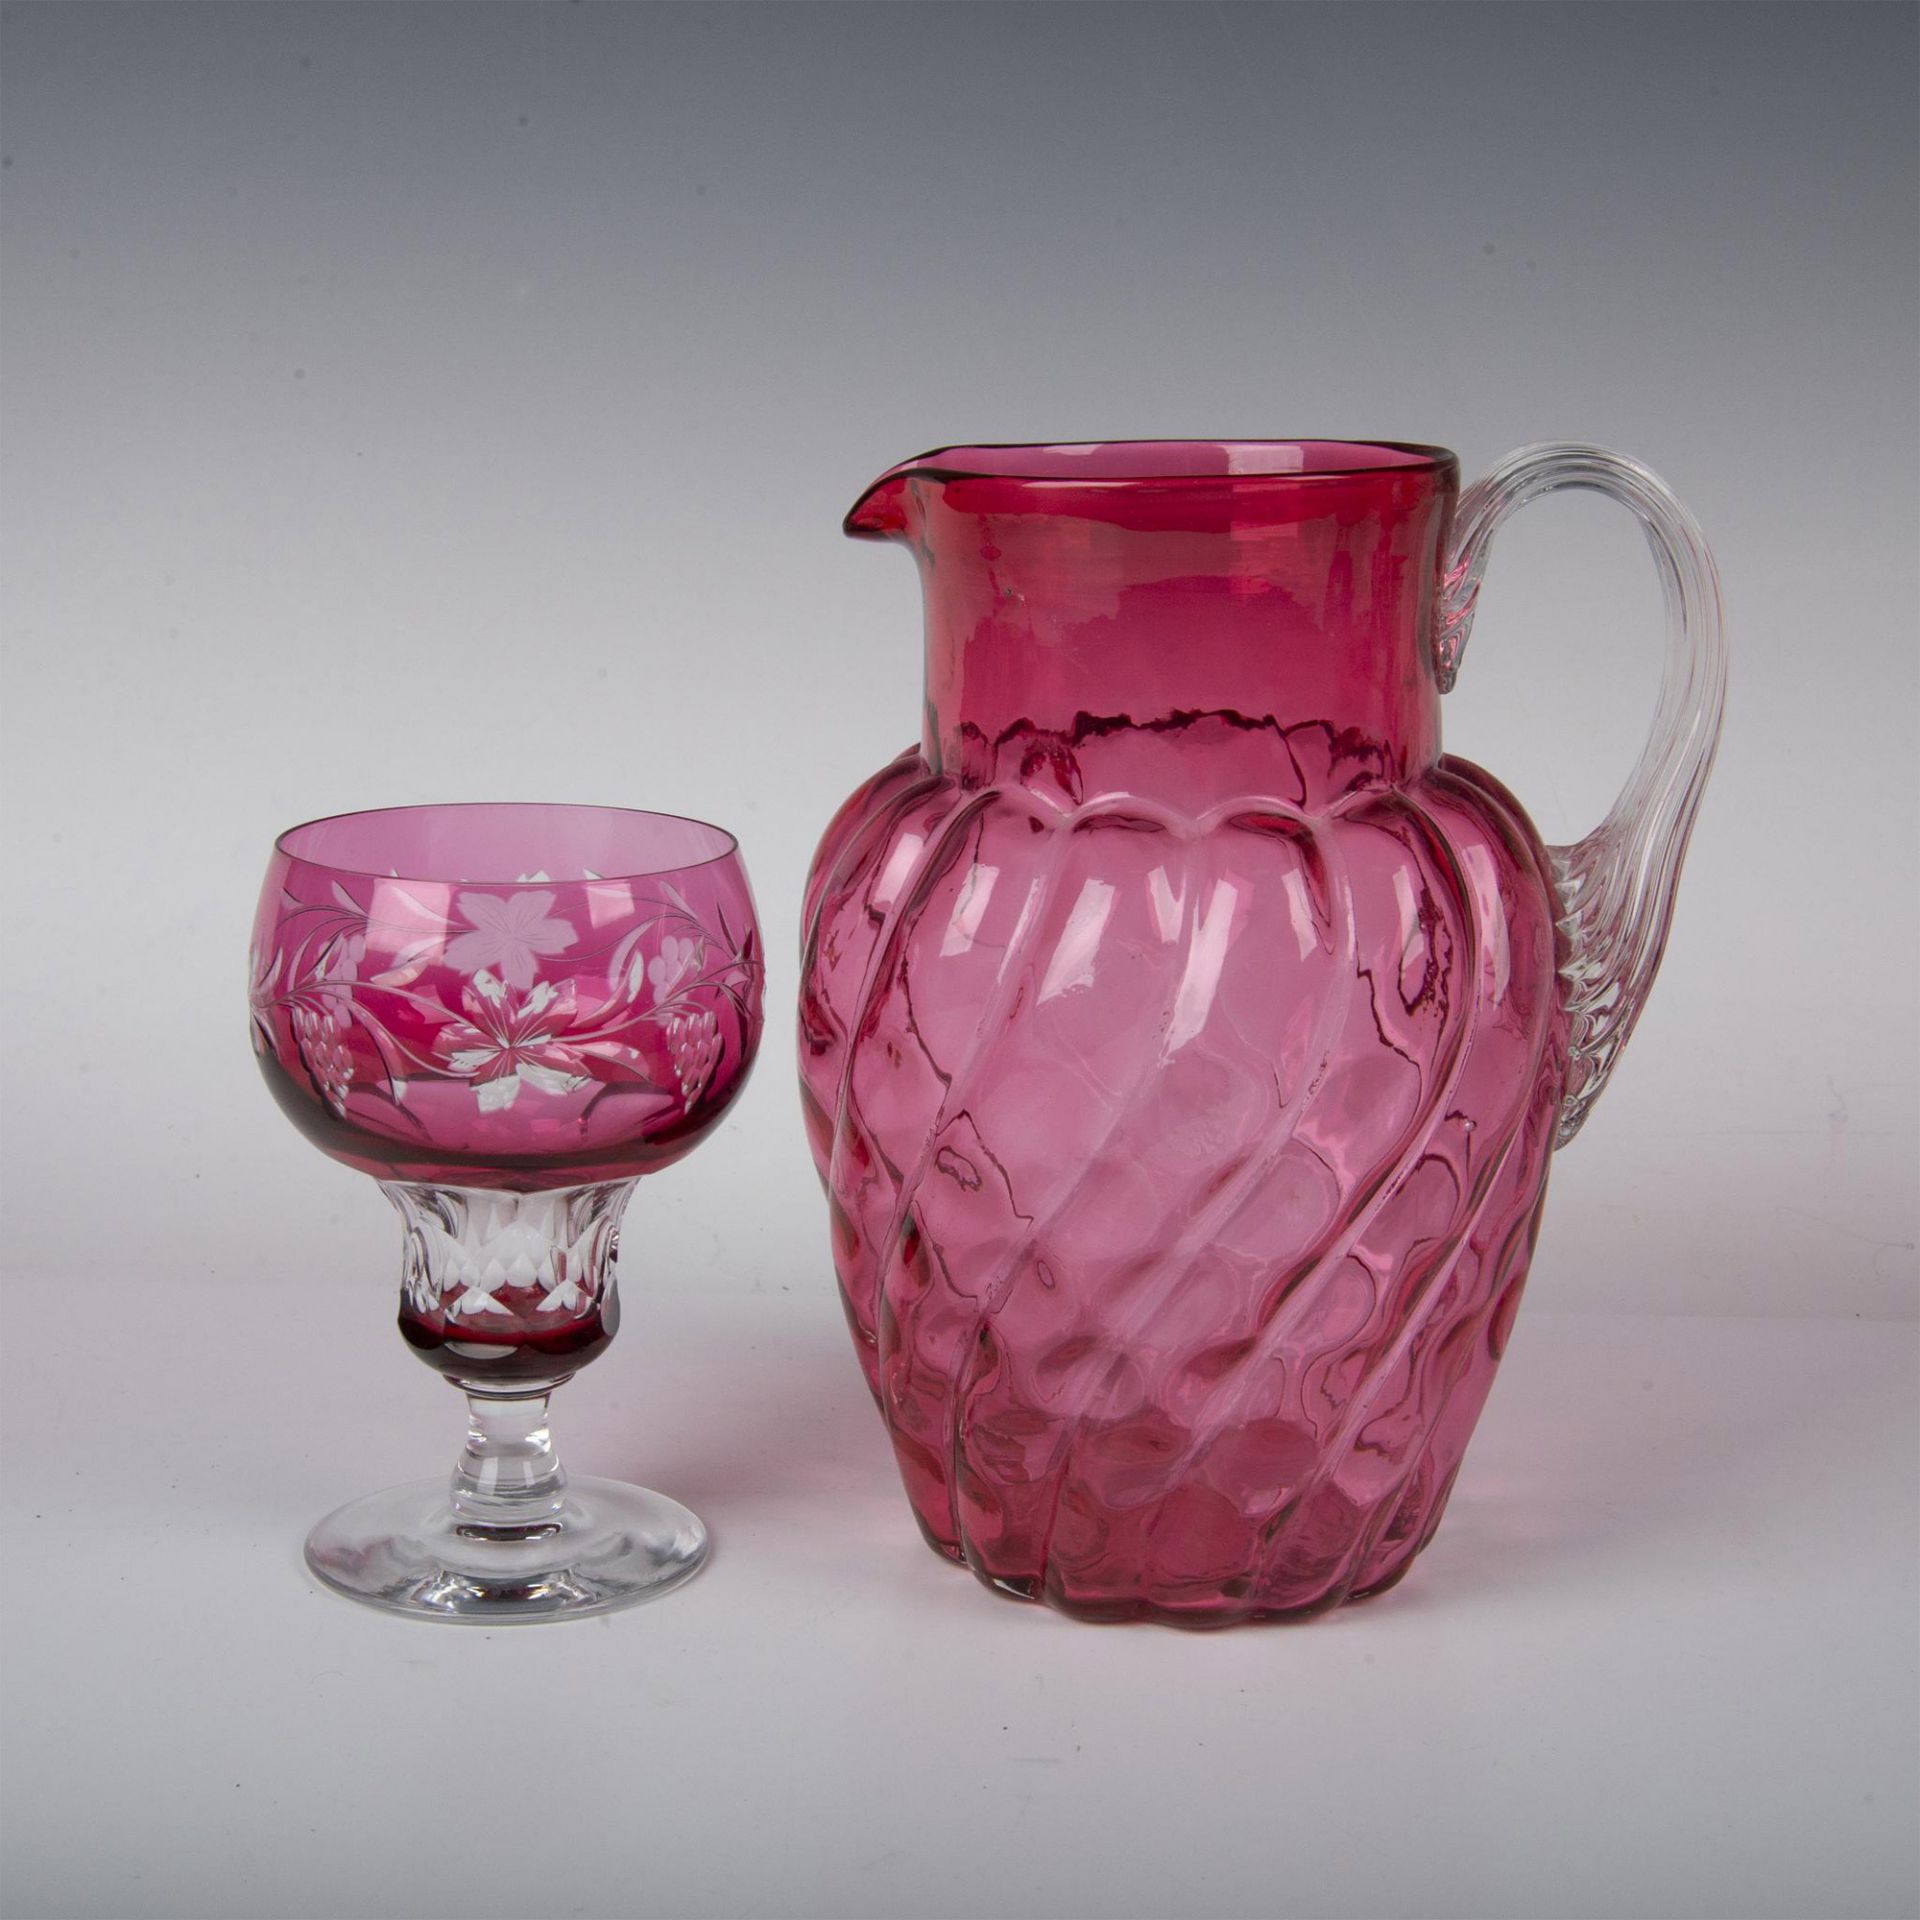 8pc Vintage Cranberry Glass Pitcher and Stemmed Glasses - Image 2 of 4